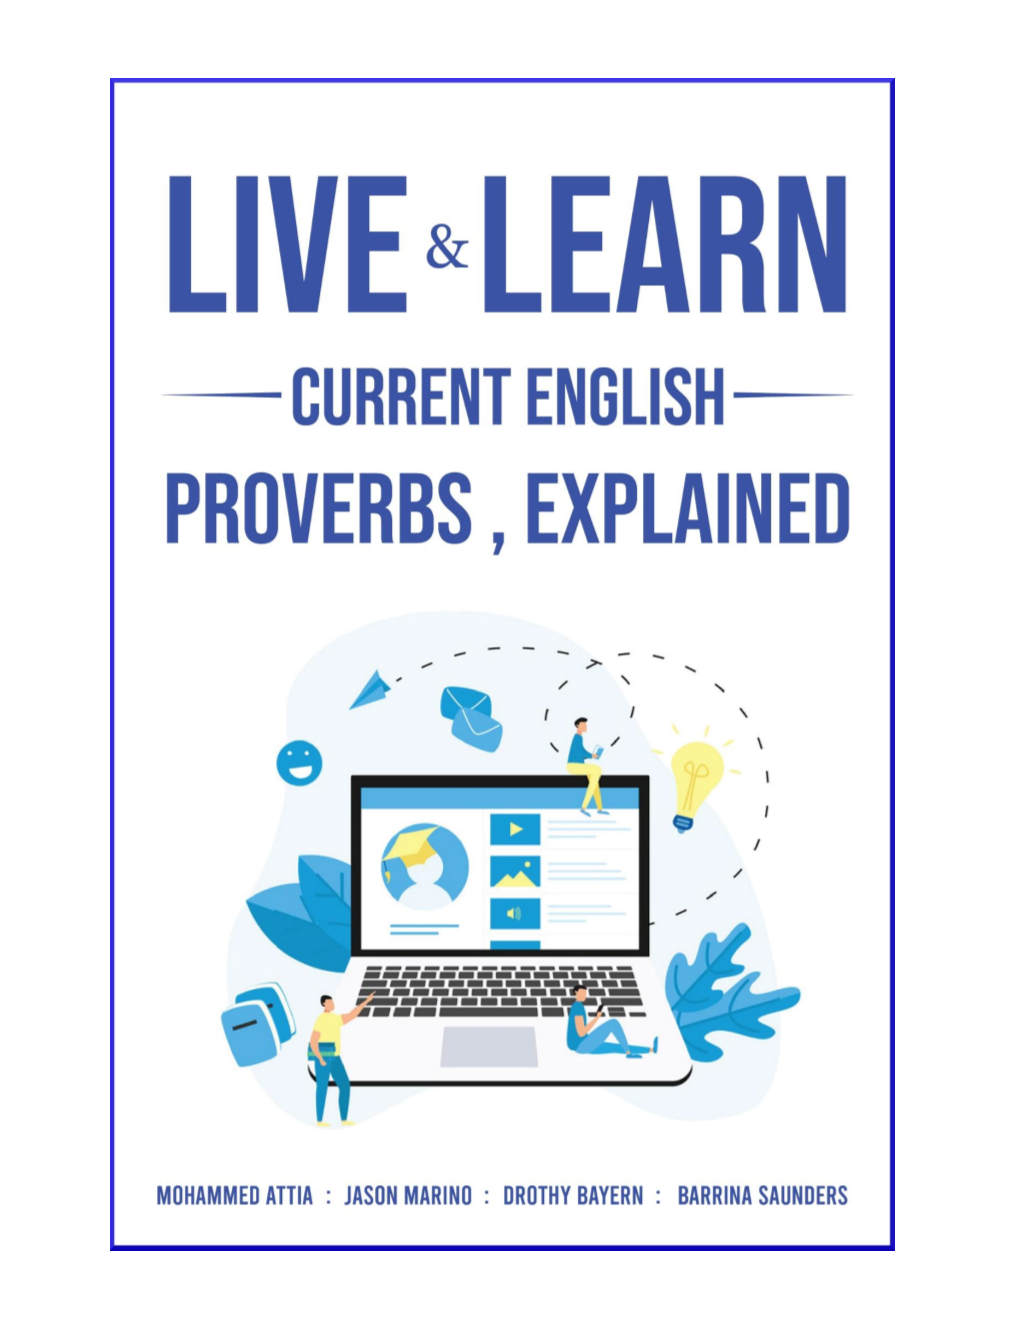 Live and Learn: Current English Proverbs, Explained